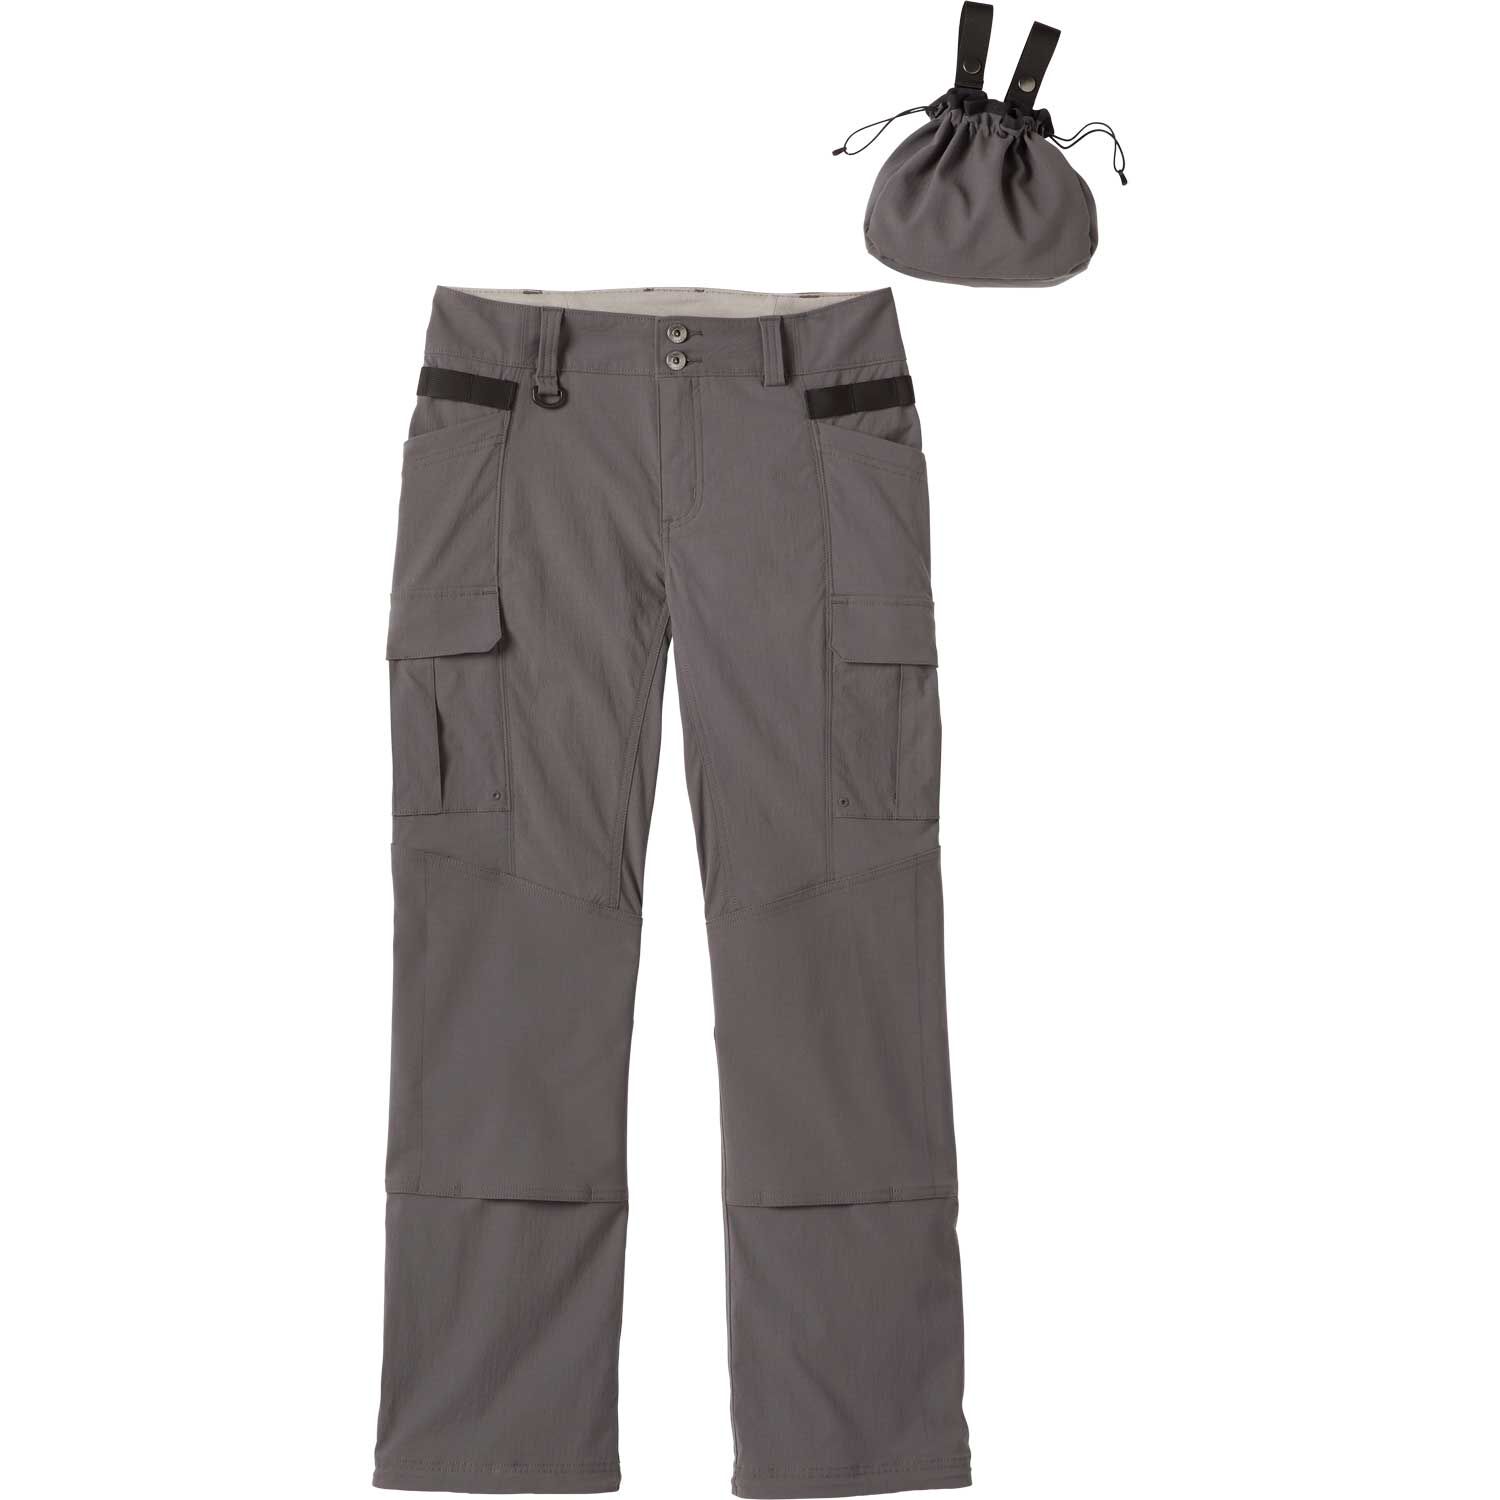 Women's Heirloom Ultimate Gardening Pants | Duluth Trading Company